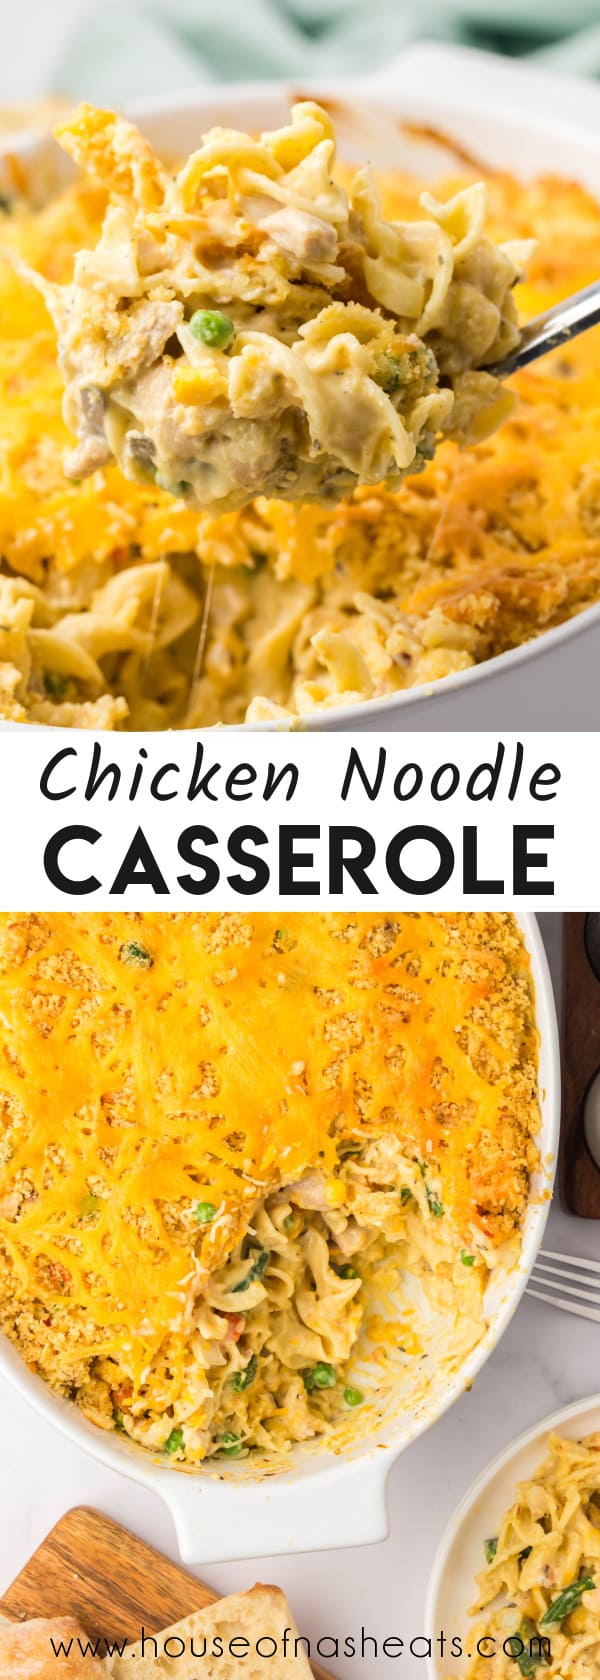 A collage of images of chicken noodle casserole with text overlay.